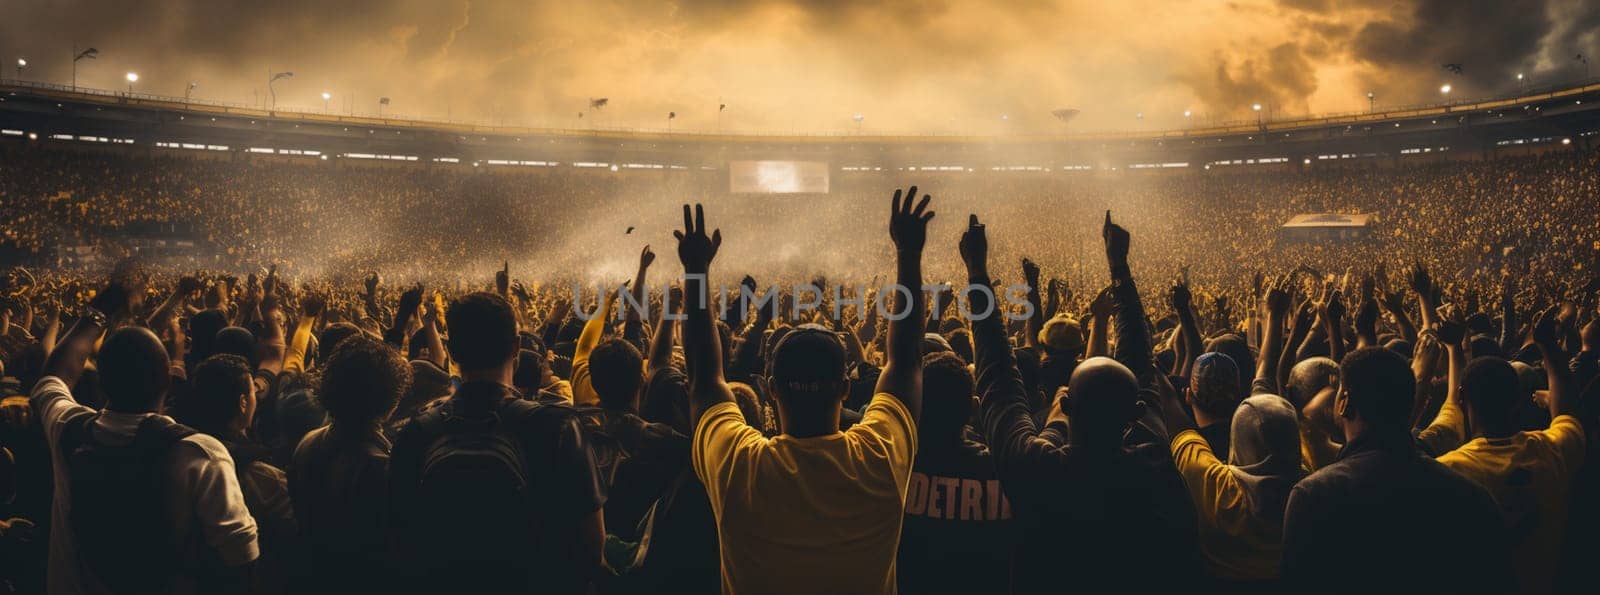 Fans celebrating the success of their favorite sports team on the stands of the professional stadium. Stadium is made in 3D. High quality photo